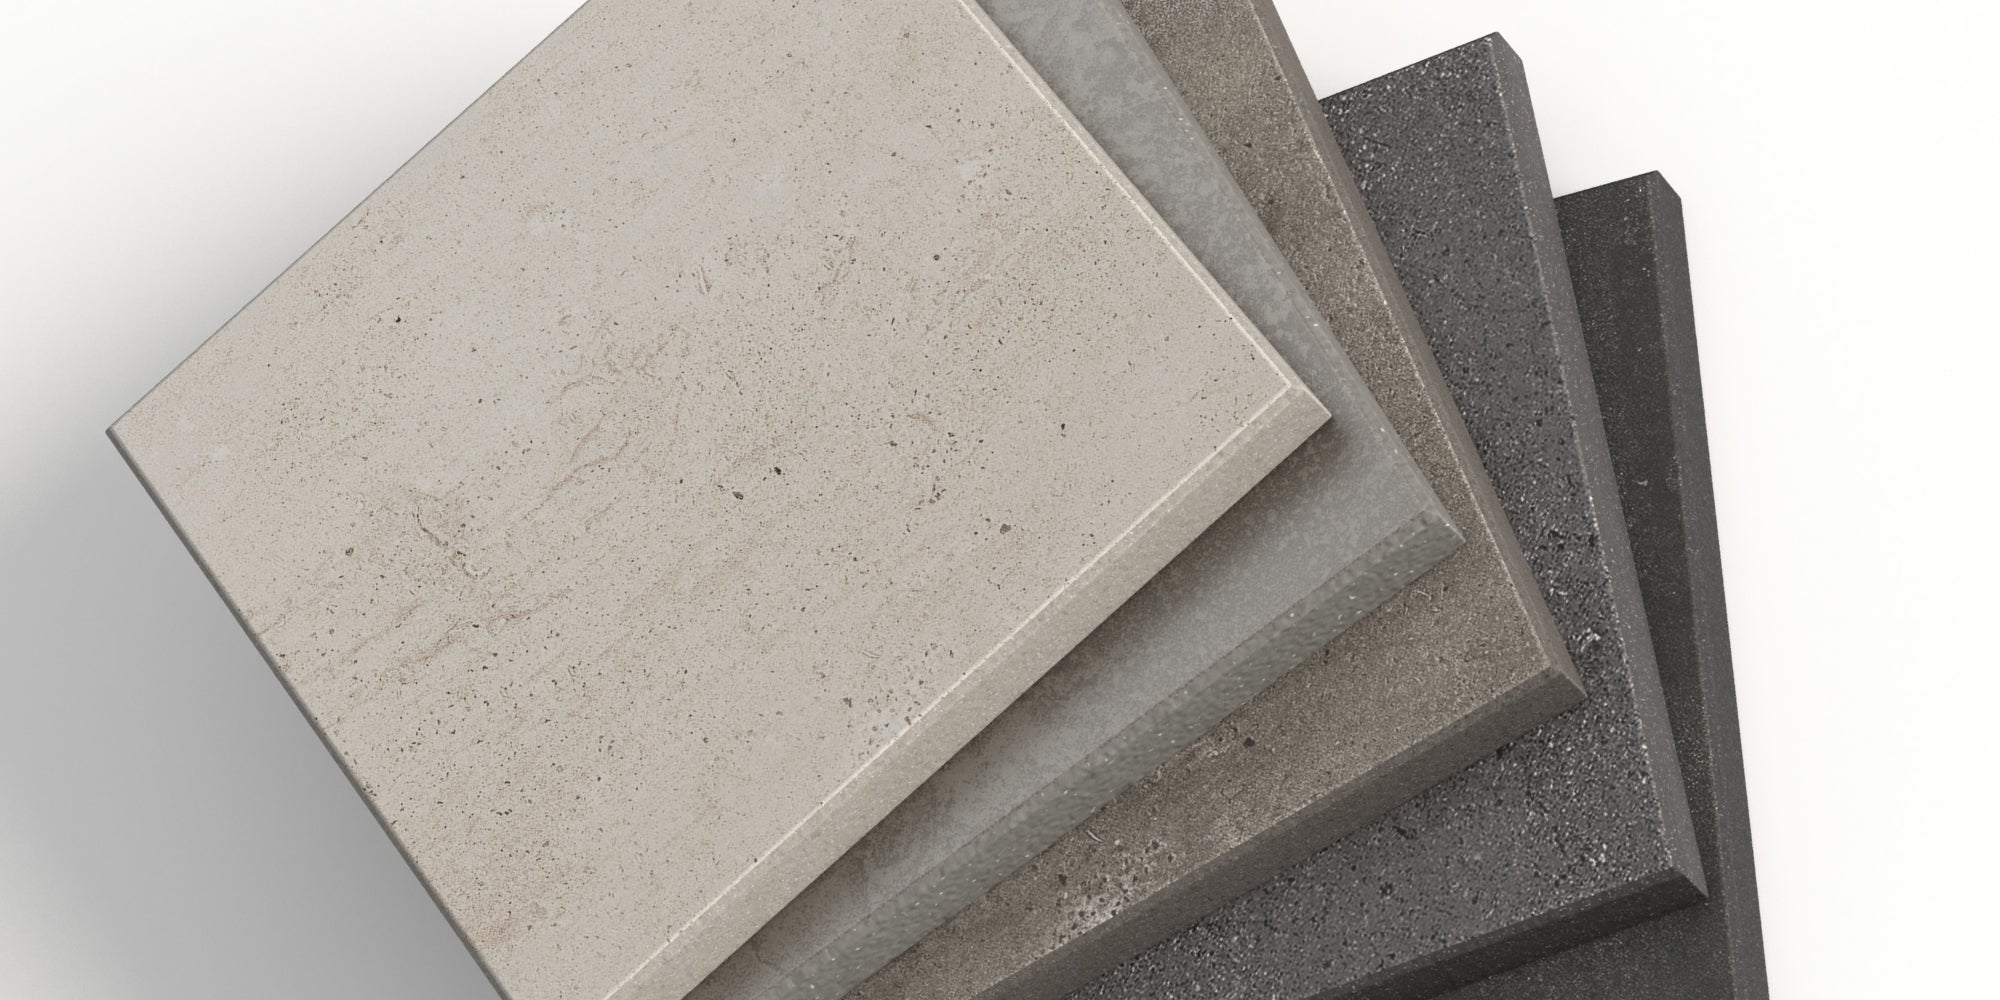 Display of diverse 4x4 concrete-look porcelain tile samples from our collection, showcasing a variety of textures and hues. Each piece reflects the intricate detail and quality, inviting viewers to explore and request their own samples for a hands-on experience.